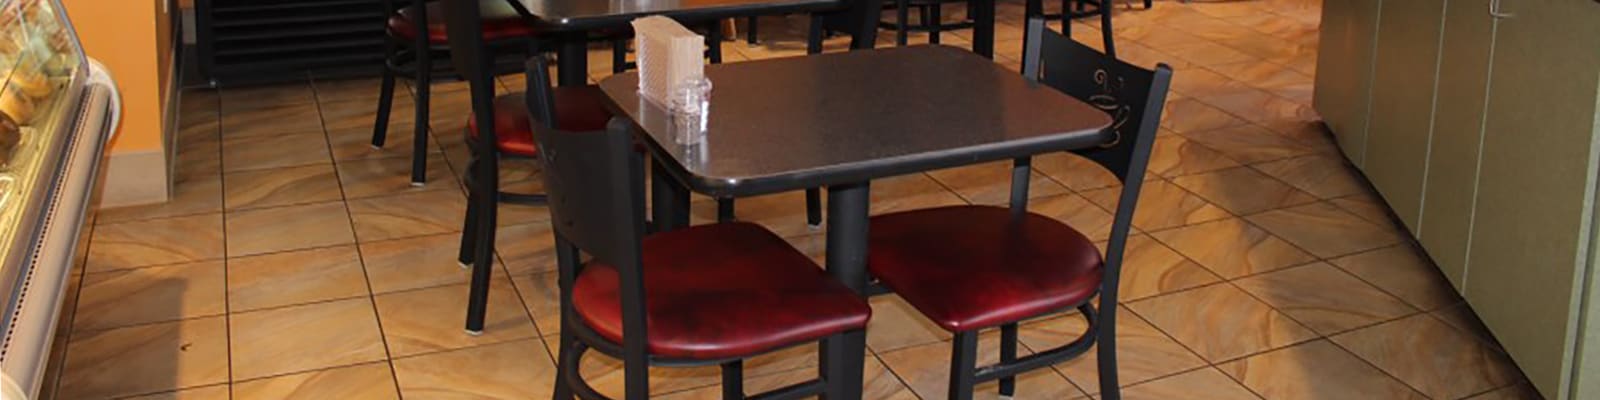 Popular Cafe Chairs